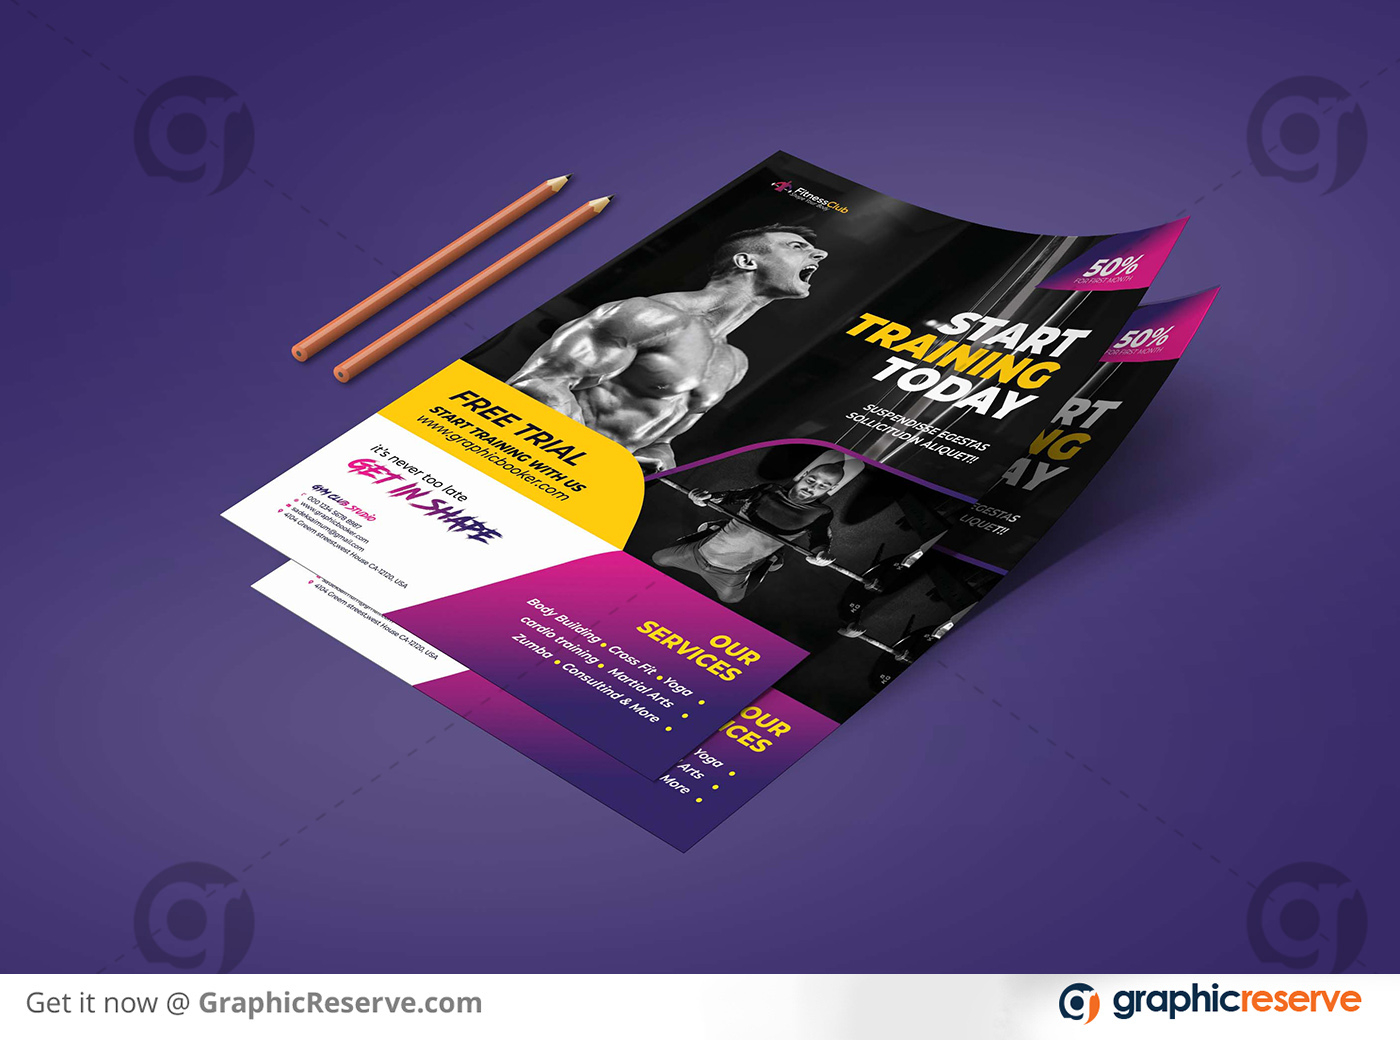 Fitness-GYM Flyer Template - Graphic Reserve Throughout Gym Open House Flyer Template Intended For Gym Open House Flyer Template